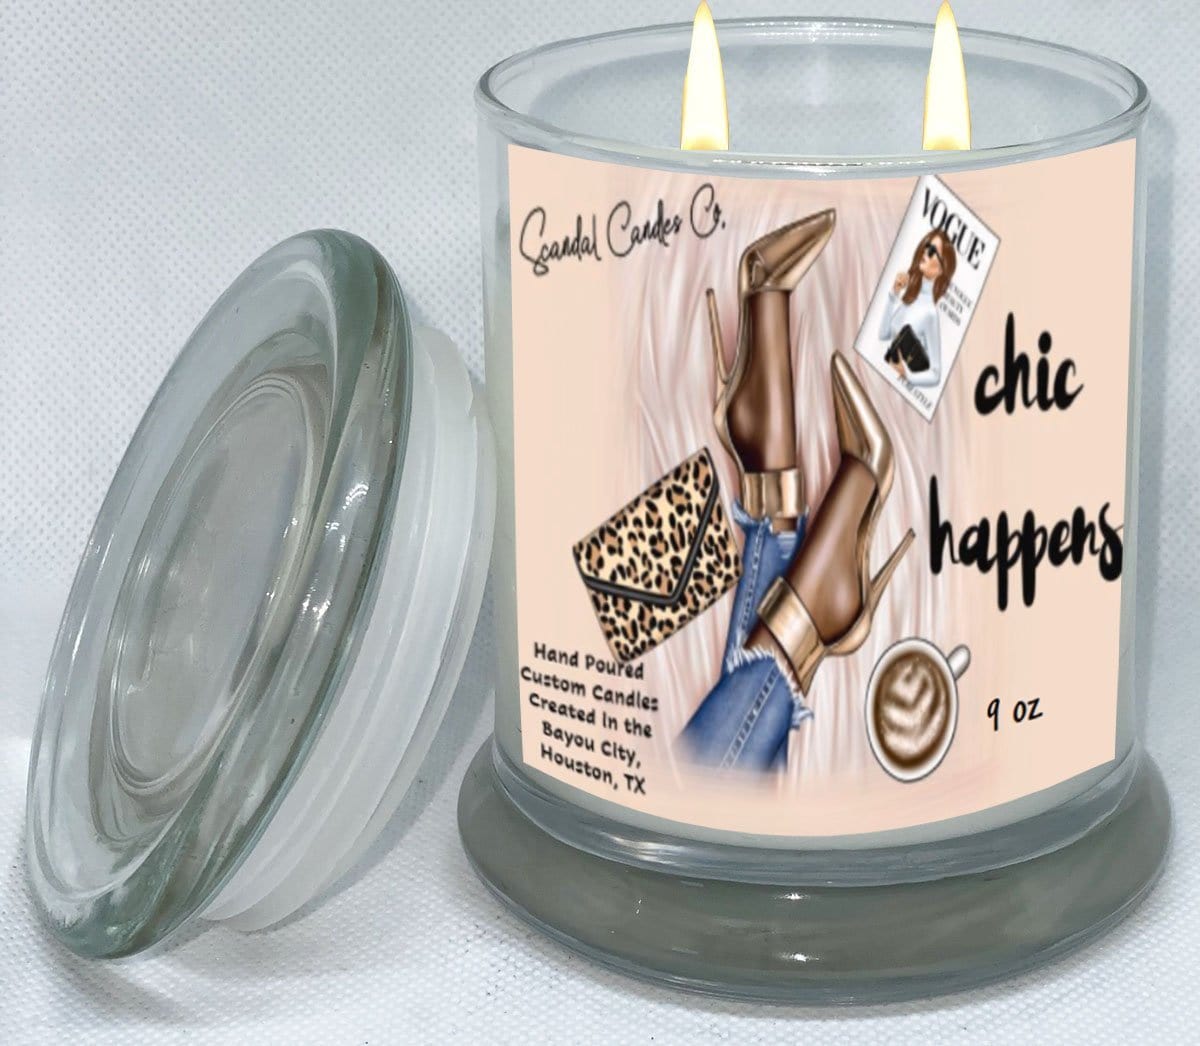 Chic Happens - Scandal Candles Co.